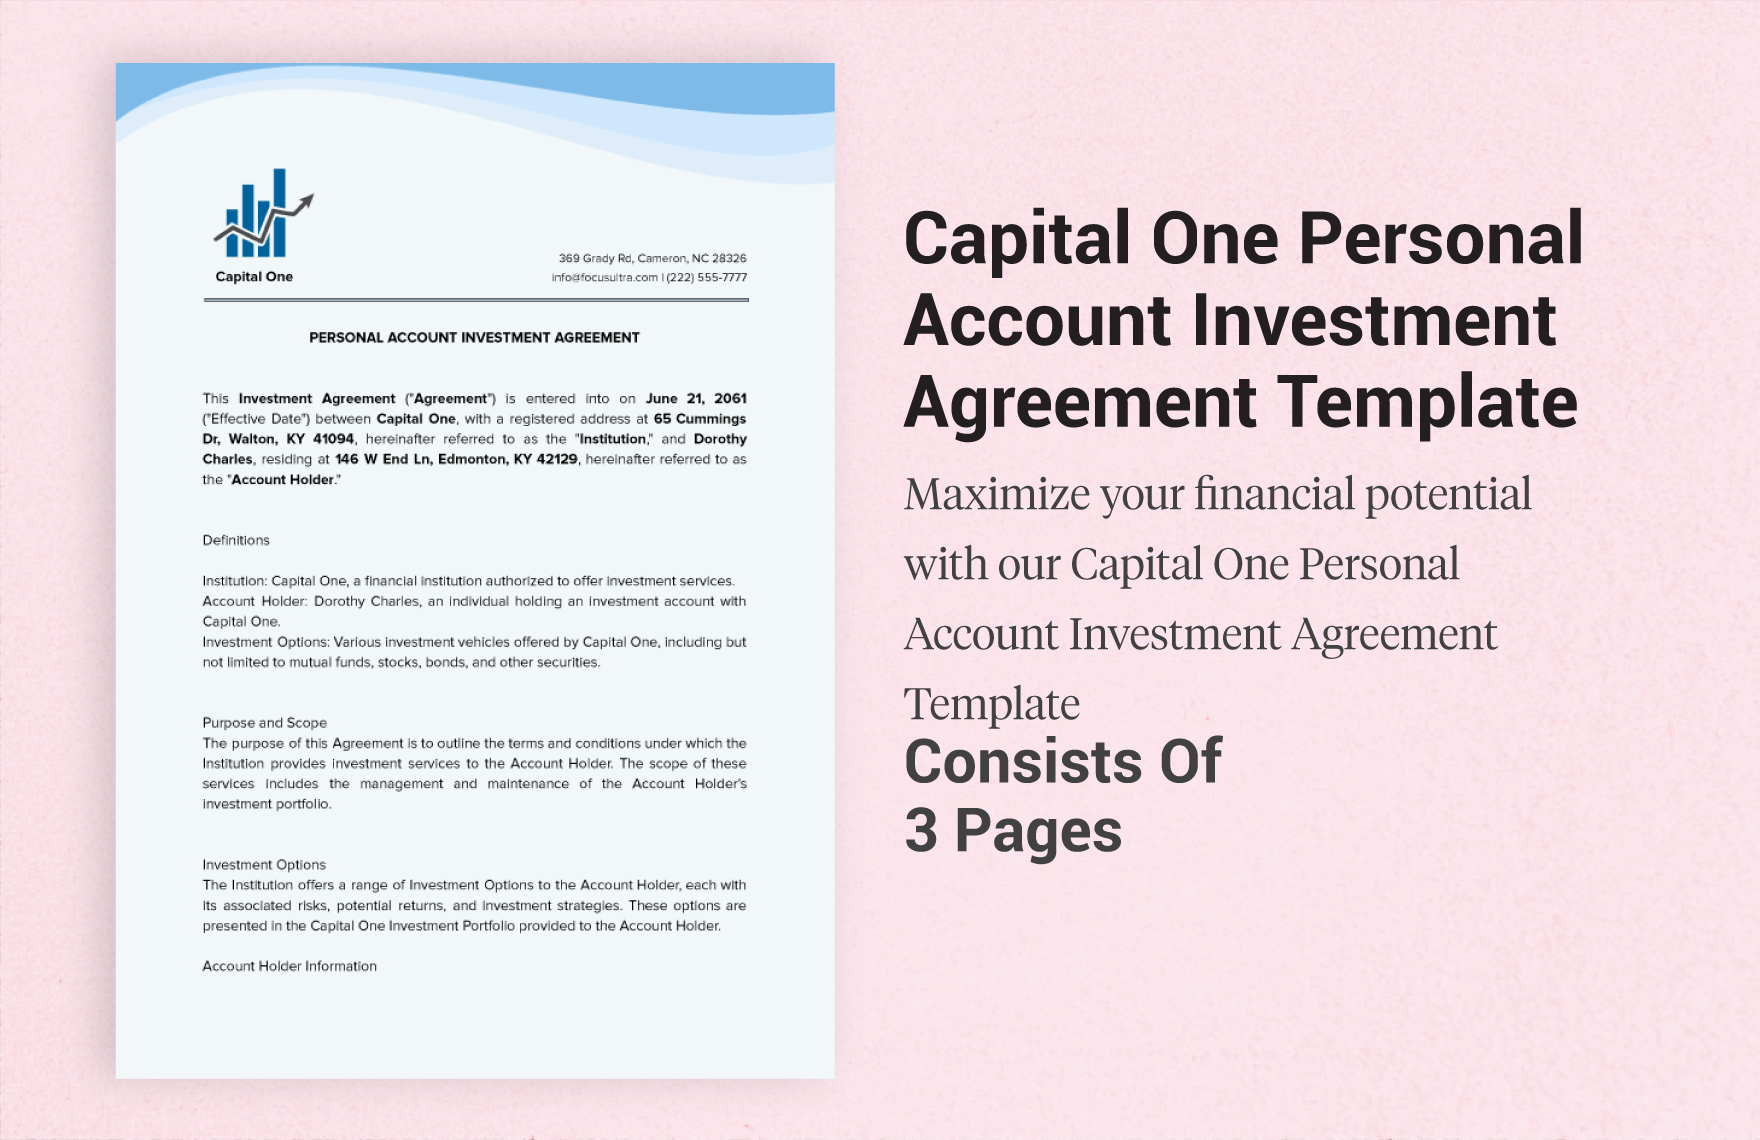 Capital One Personal Account Investment Agreement Template